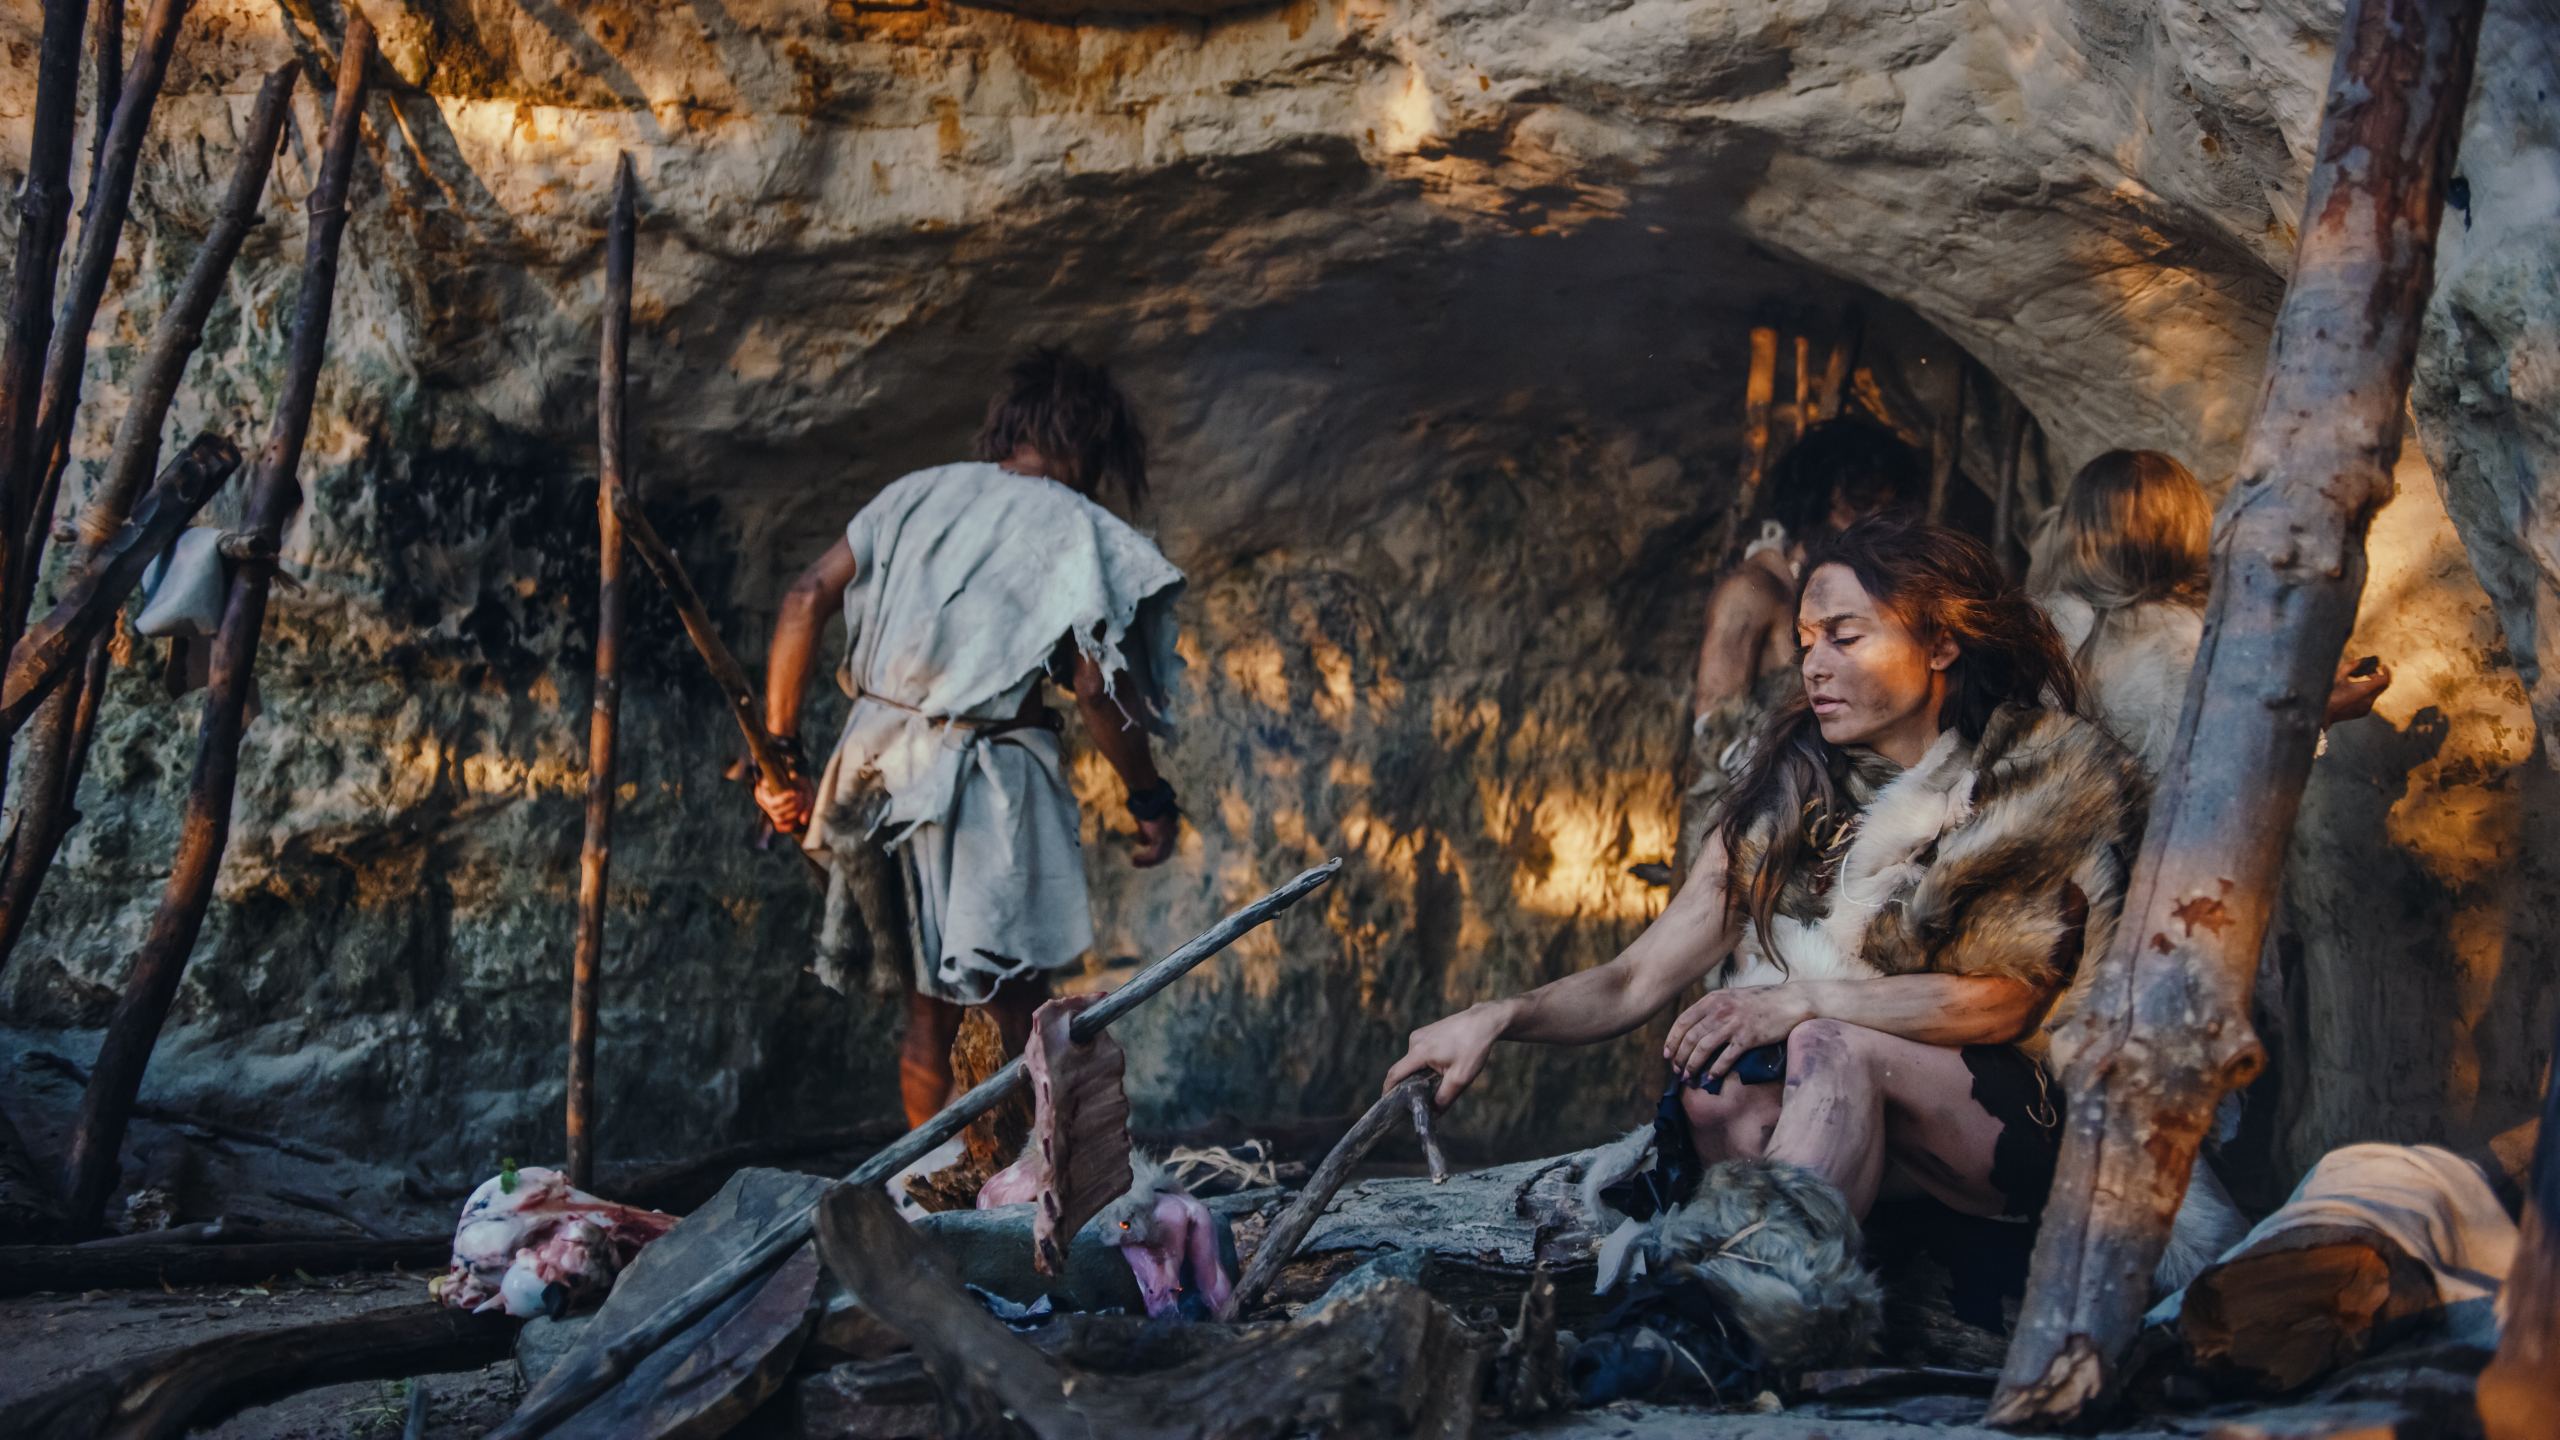 A recreational image of Neanderthal Homo Sapiens Family. Tribe of Hunter-Gatherers Wearing Animal Skin Live in a Cave. Leader Brings Animal Prey from Hunting, Female Cooks Food on Bonfire, Girl Drawing on Wals Creating Art.